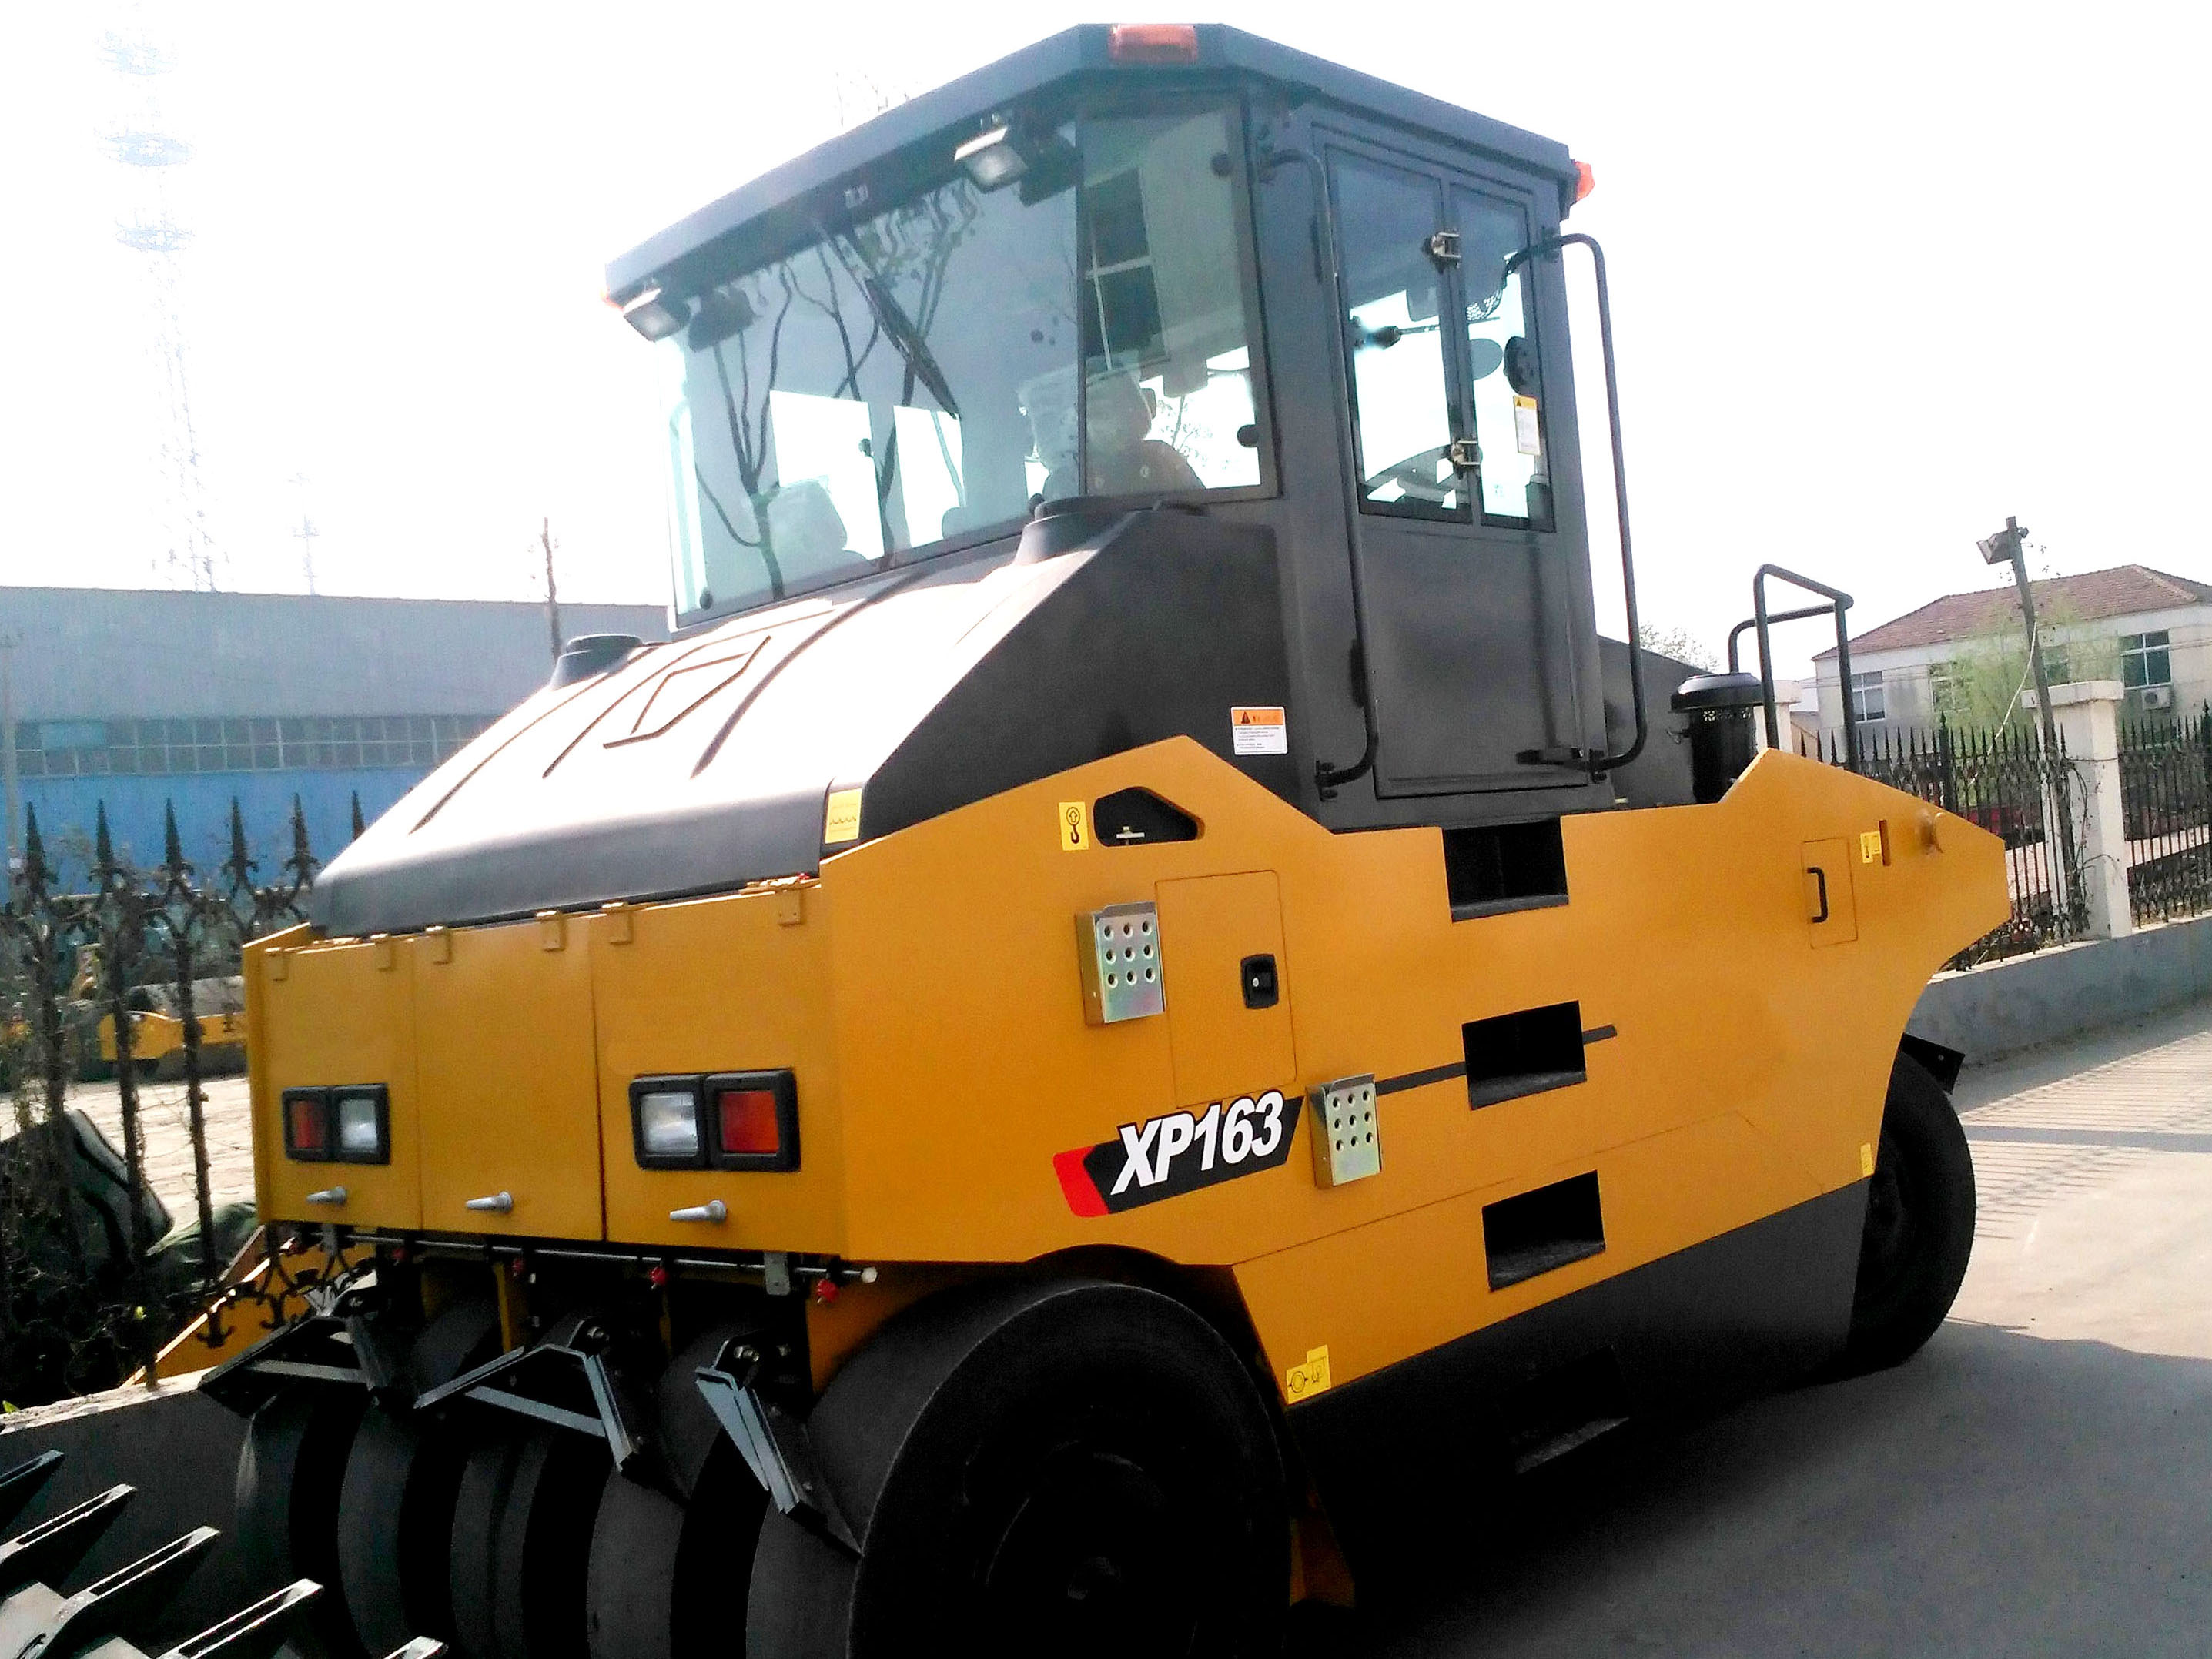 Pneumatic Road Roller-16 Tons XP163 Used Small Diesel Engines Pneumatic Road Roller